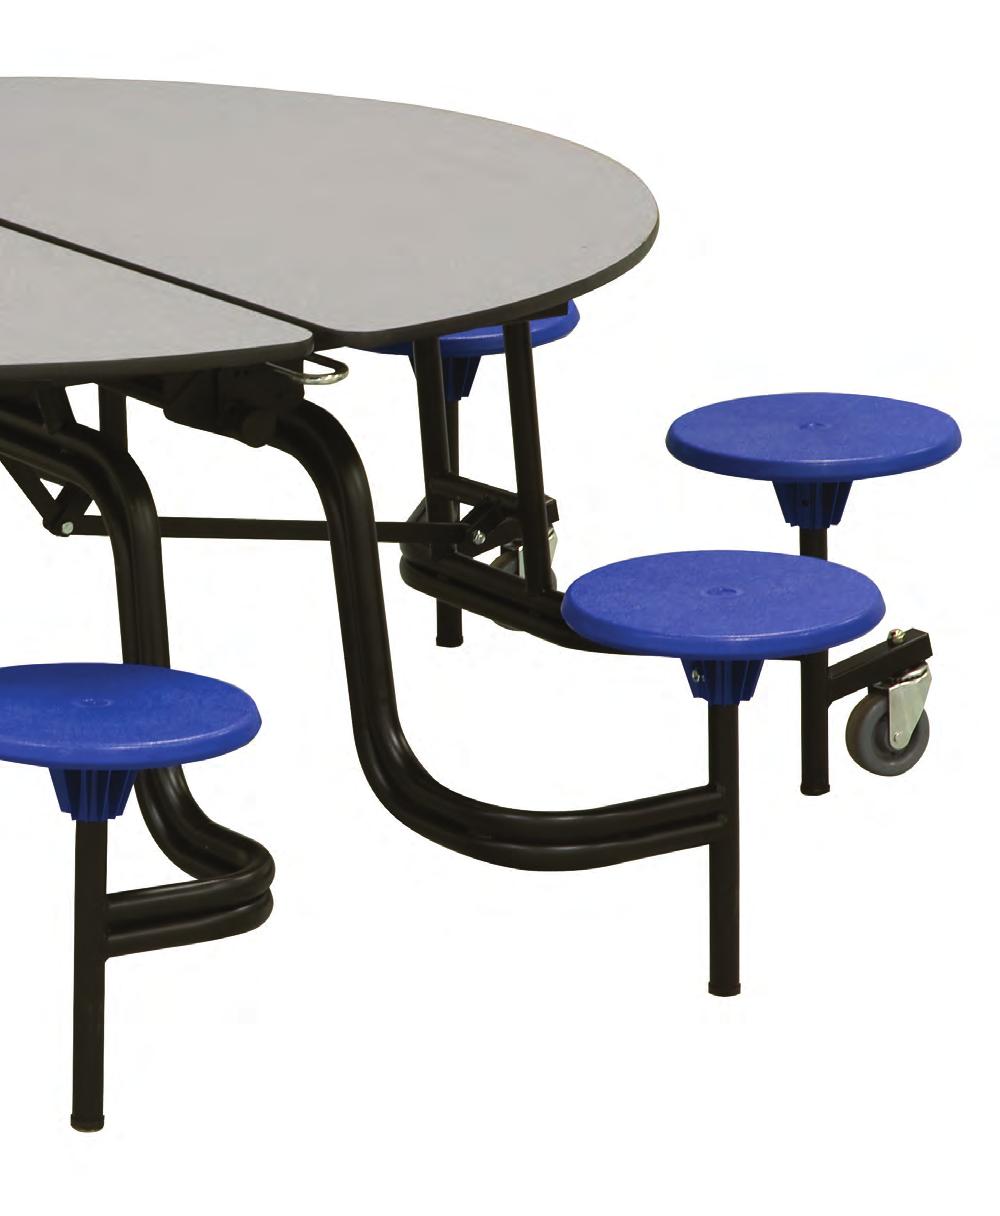 Mobile Stool Create your space utilizing a variety of table top & stool